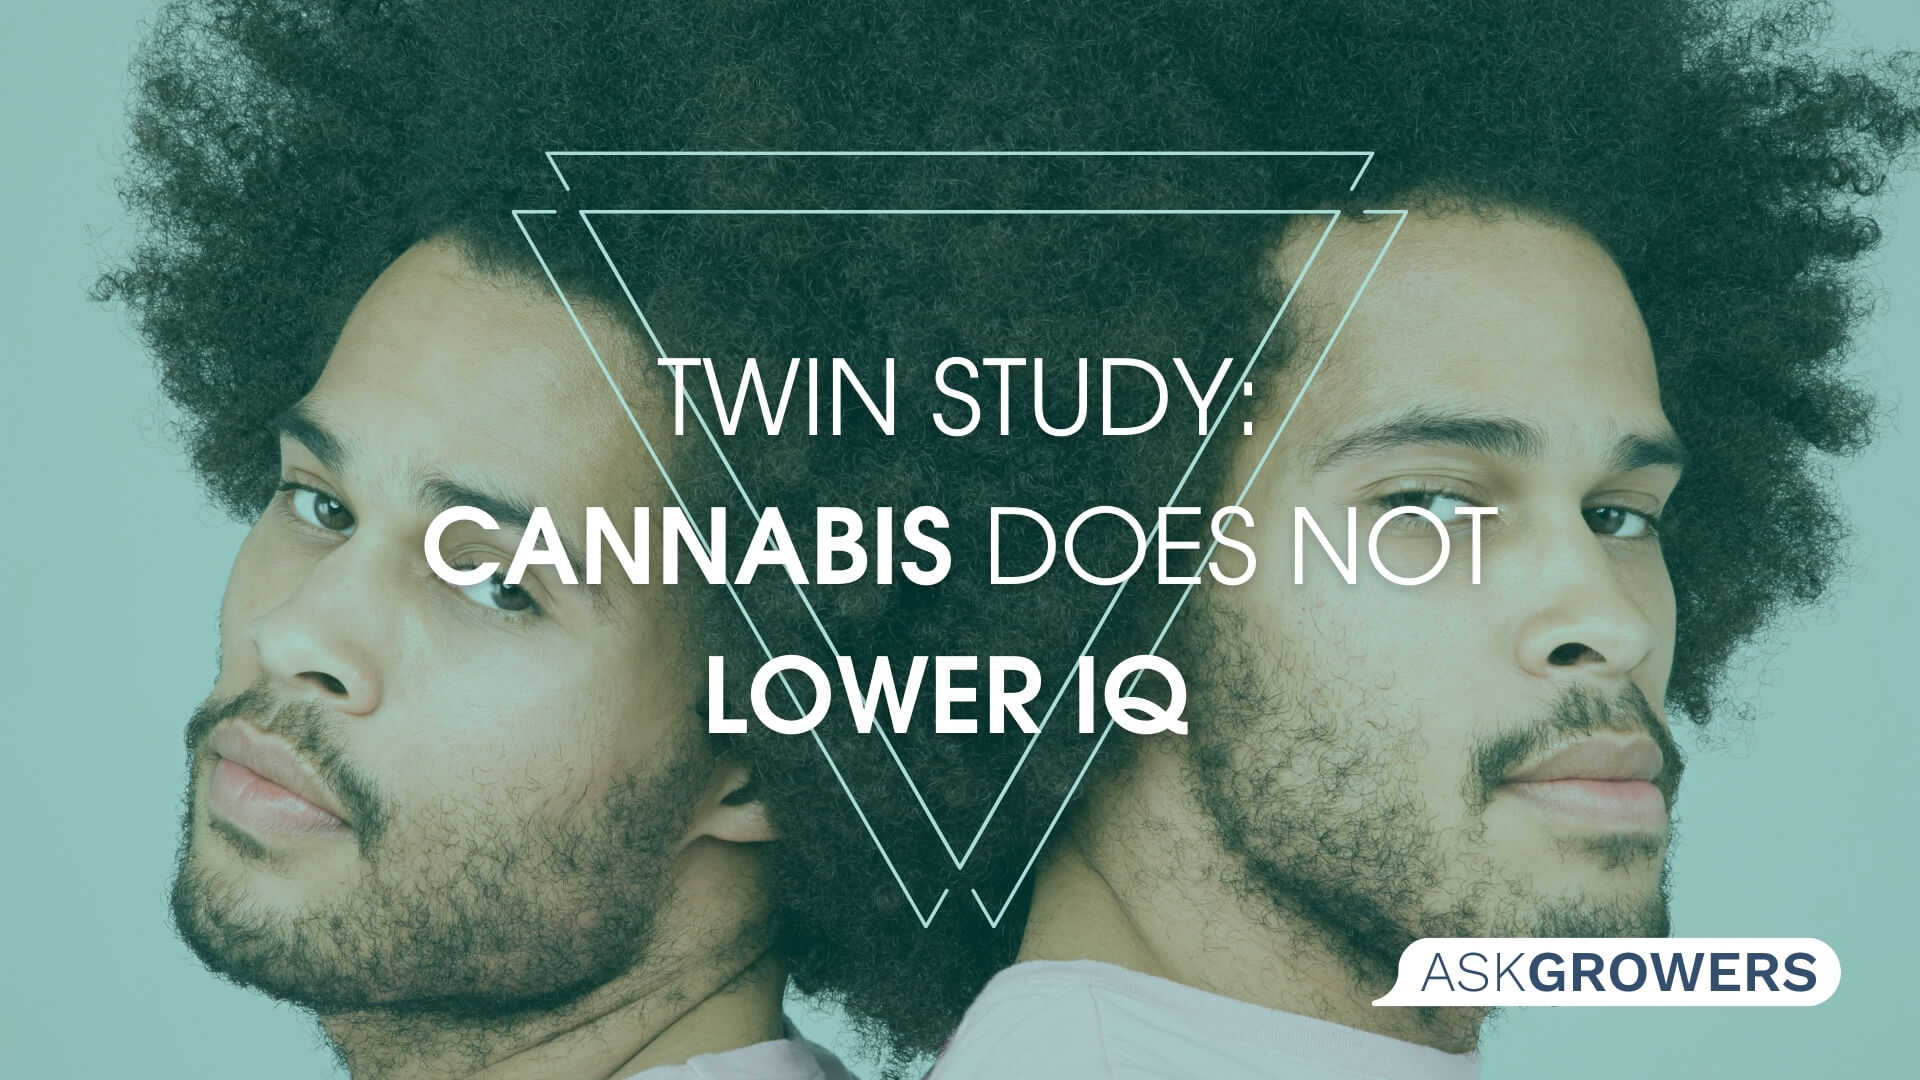 New Twin Study Confirms That Cannabis Does Not Lower IQ